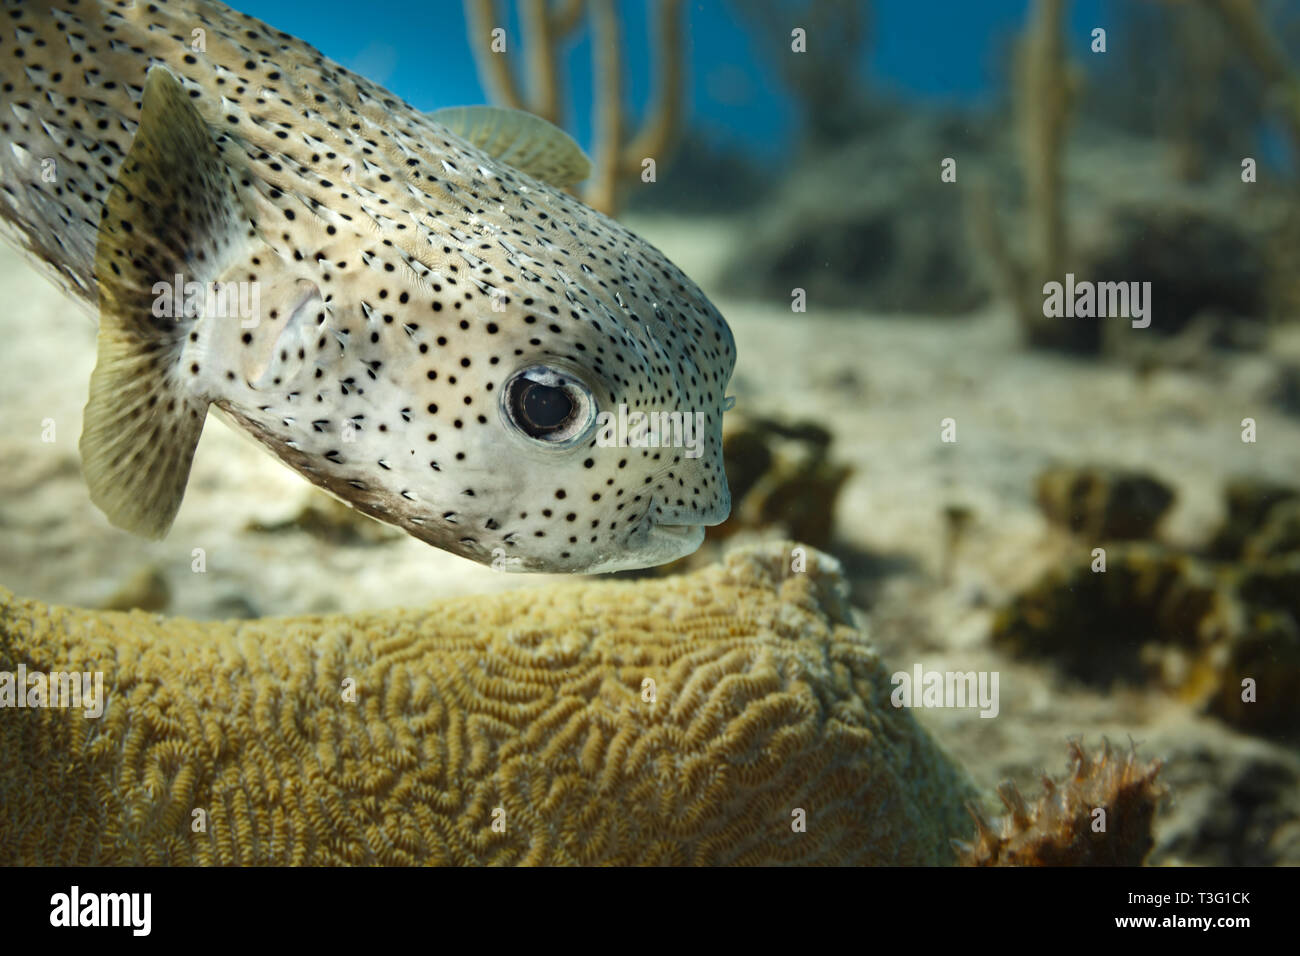 Black and white spotted porcupine pufferfish ,  Diodon hystrix,   hovering above brain coral and Bent sea rod,Plexaura flexuosa Stock Photo